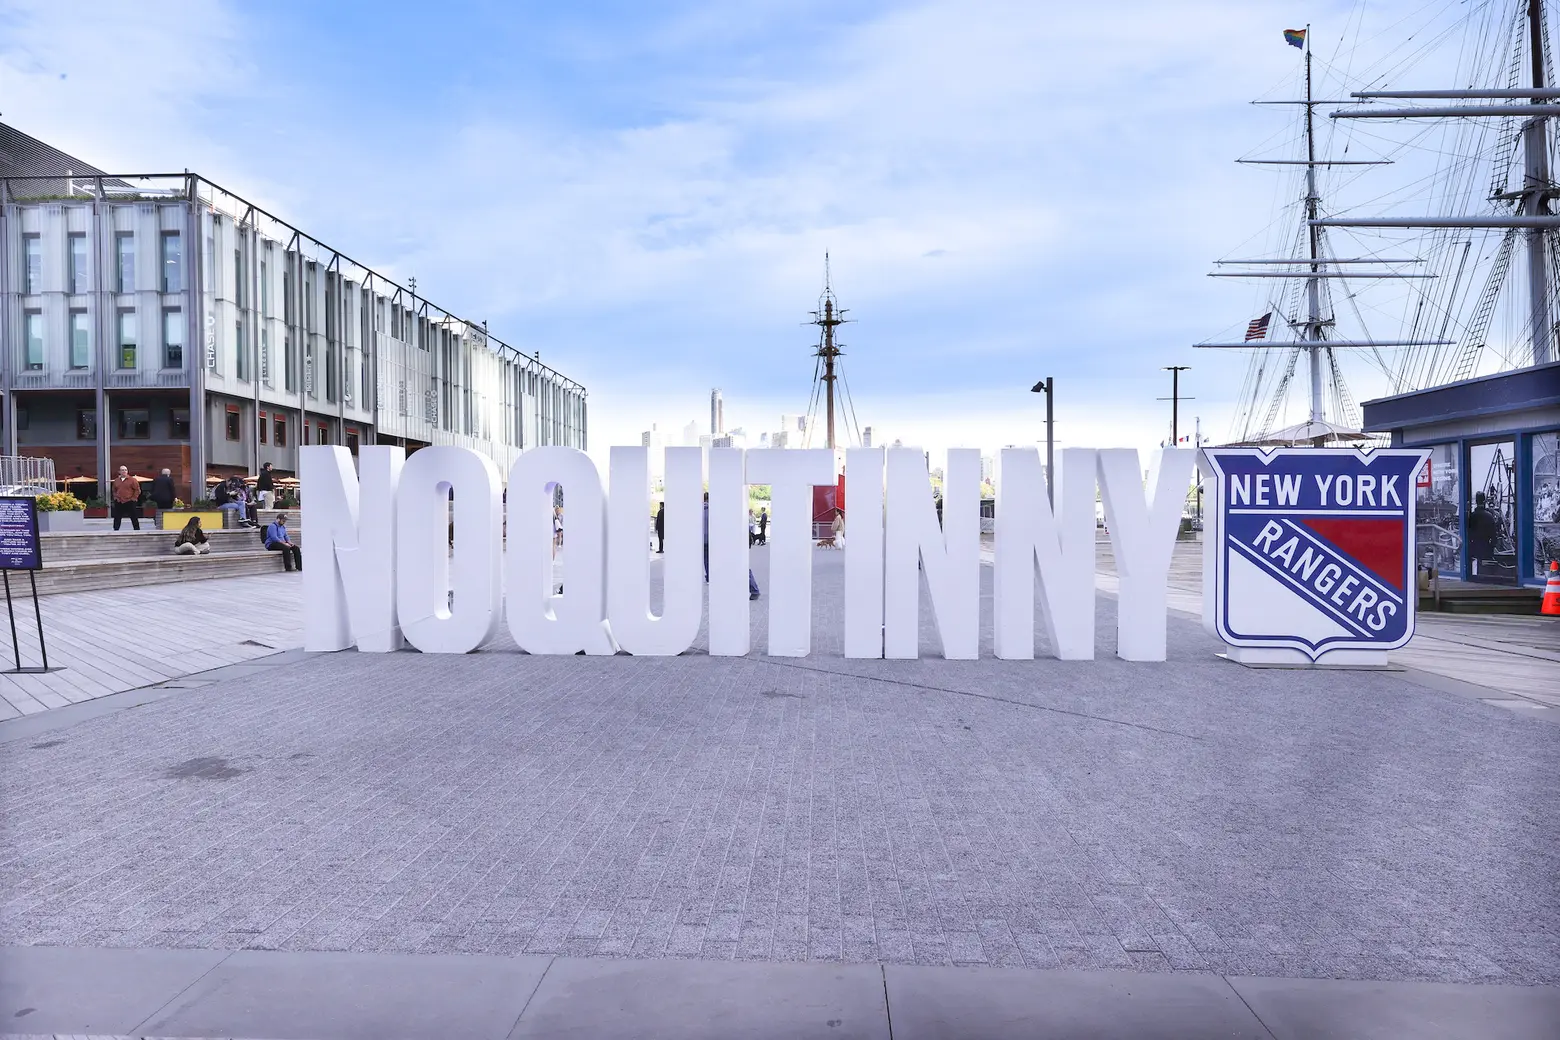 The 2022 New York Rangers Game Day Experience